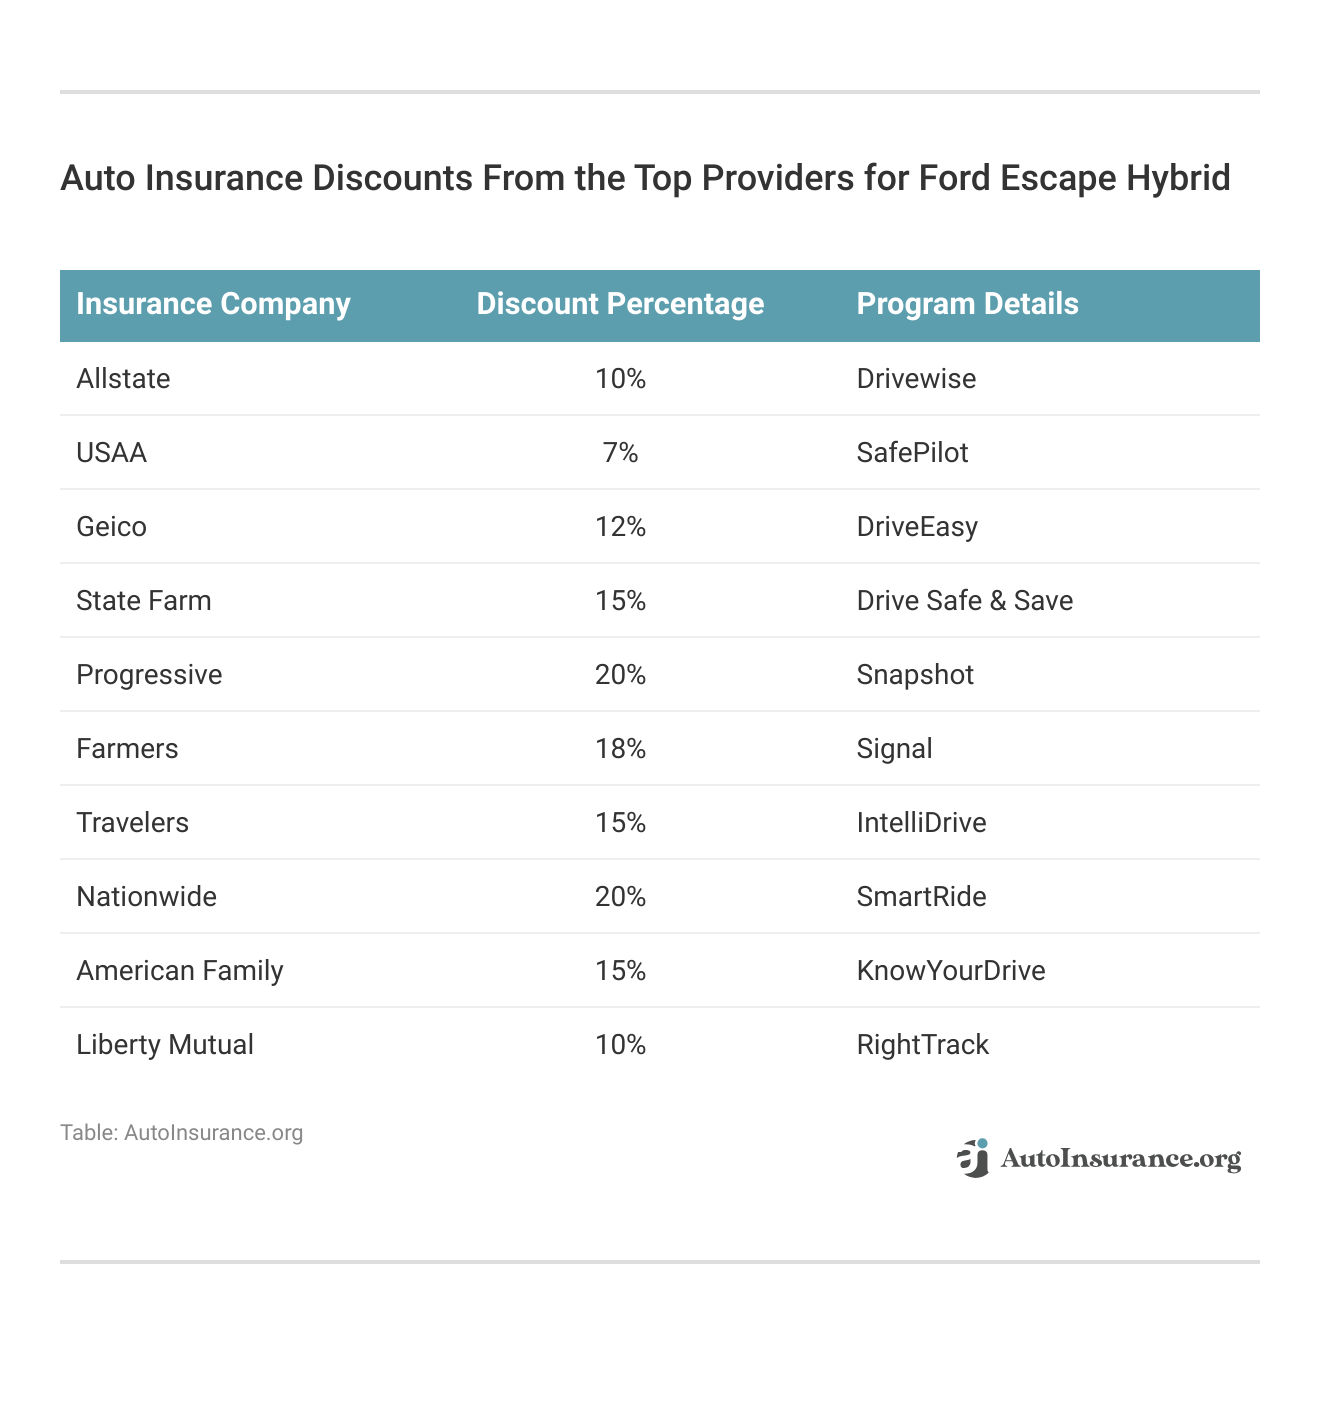 <h3>Auto Insurance Discounts From the Top Providers for Ford Escape Hybrid</h3>